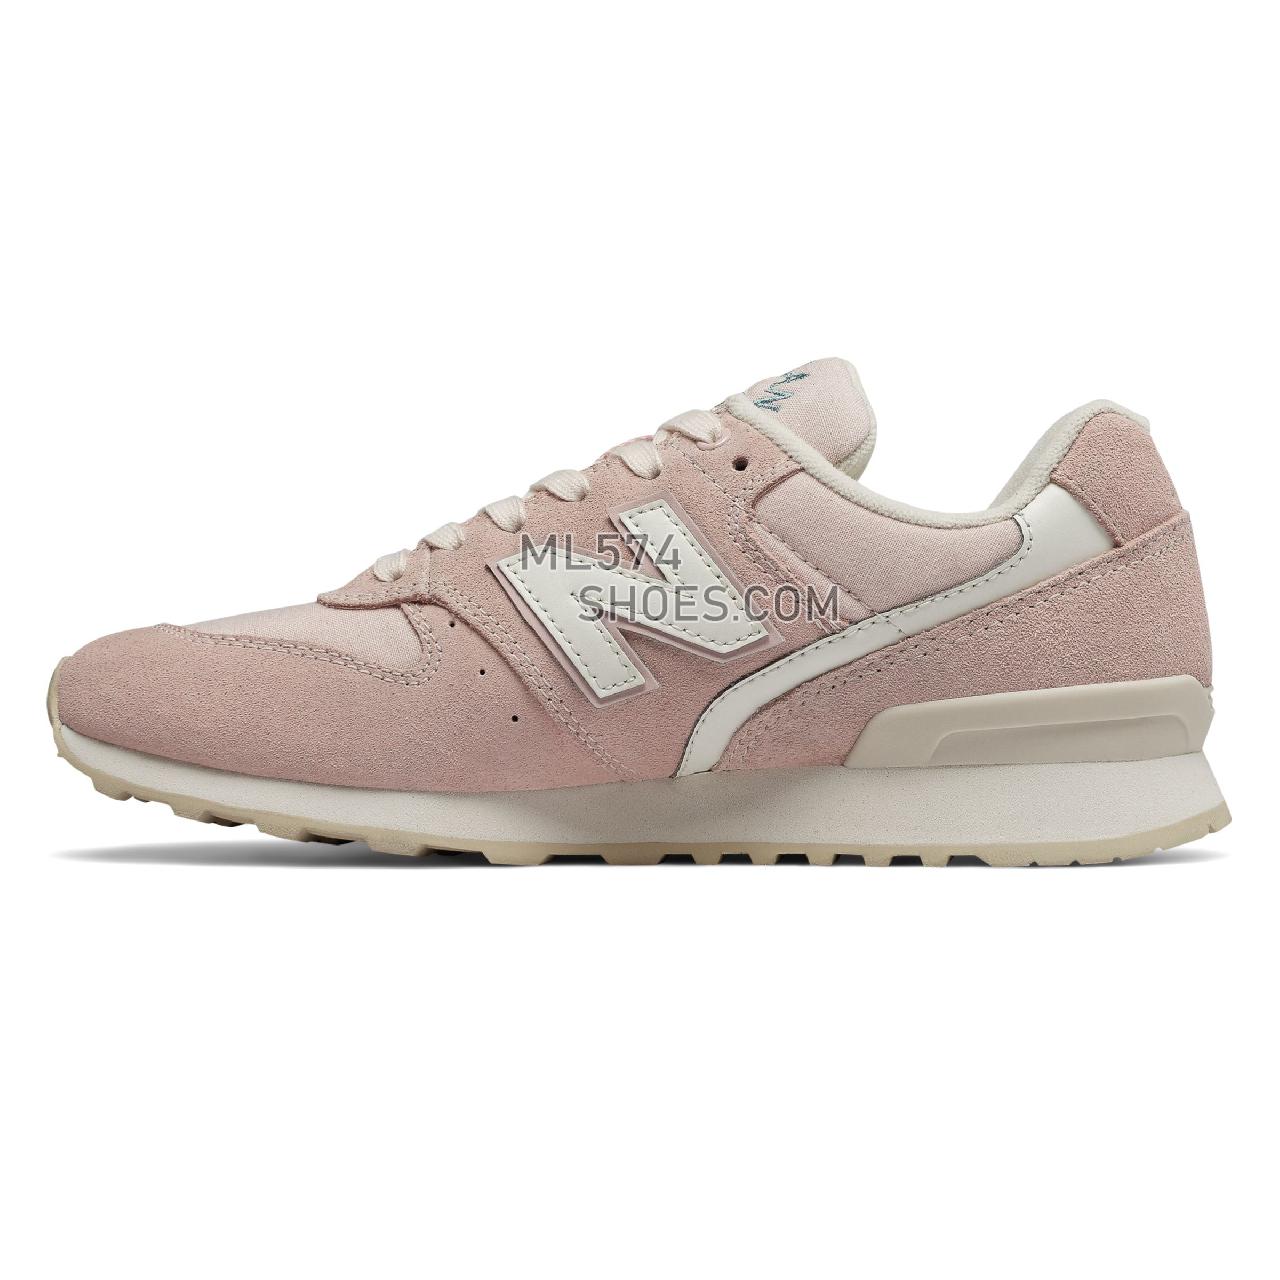 New Balance Suede 996 - Women's Suede 996 Running - Oyster Pink with Sea Salt - WR996YD